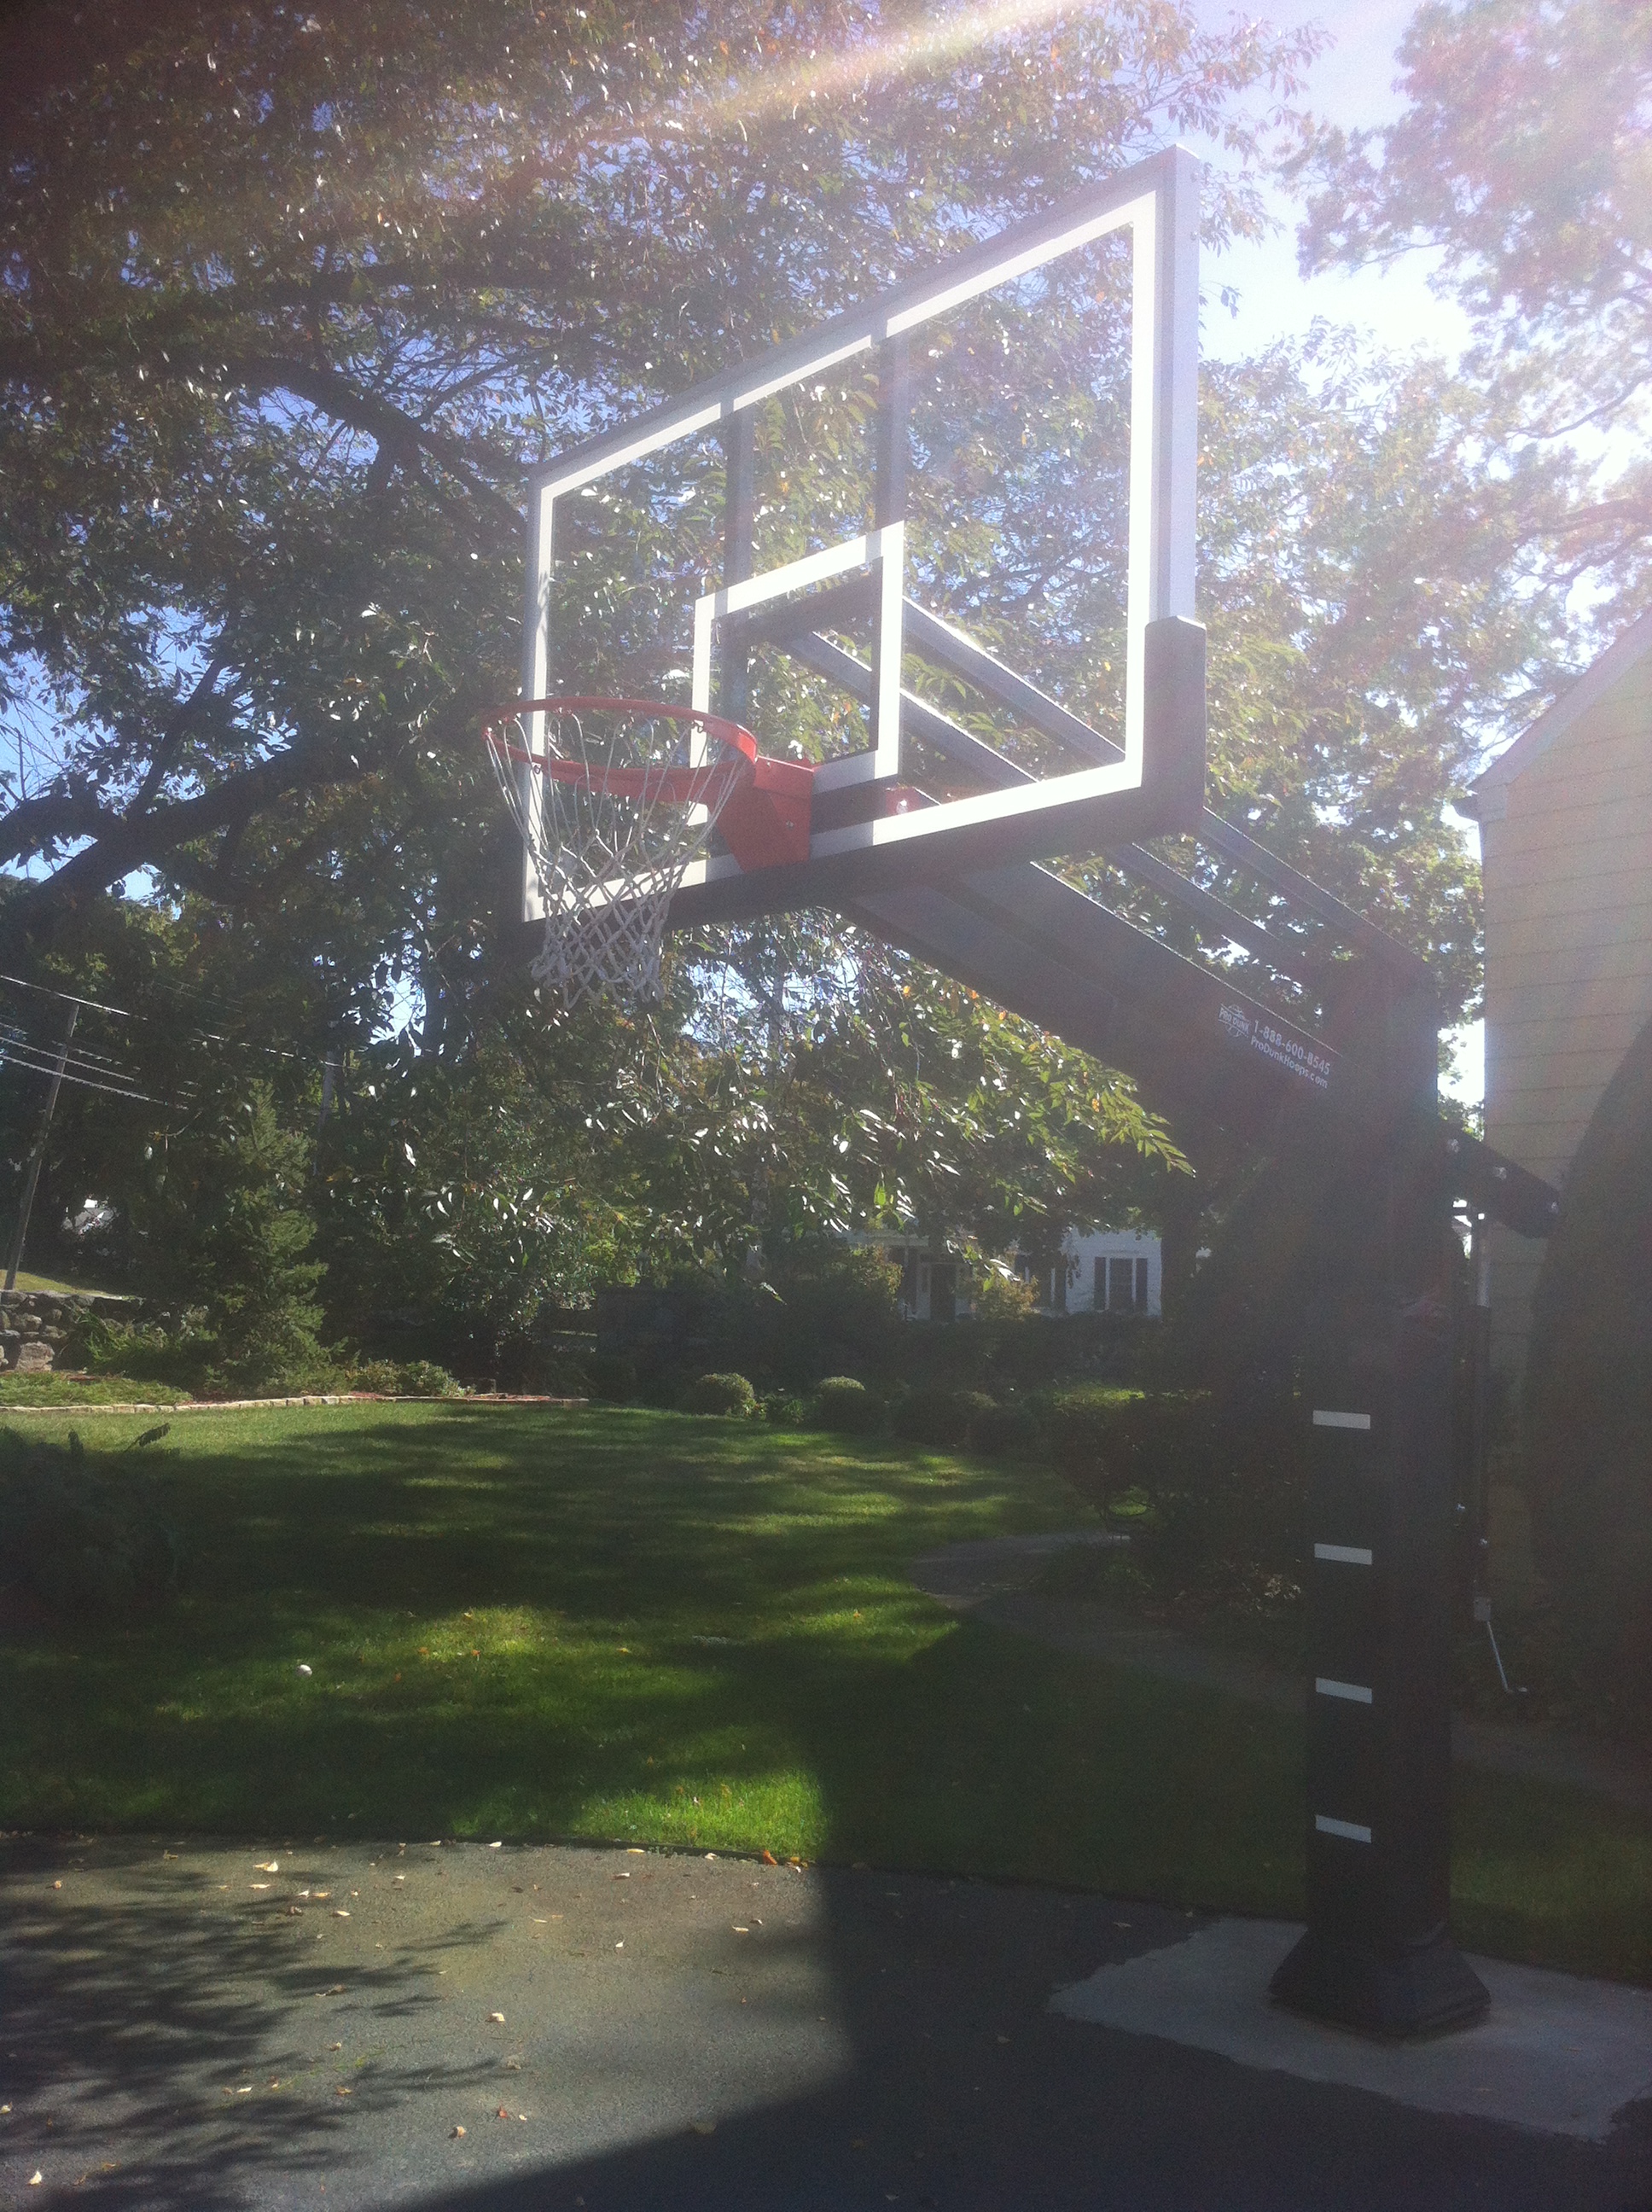 The bright sun and beautiful day really show off this Pro Dunk Diamond basketball system.